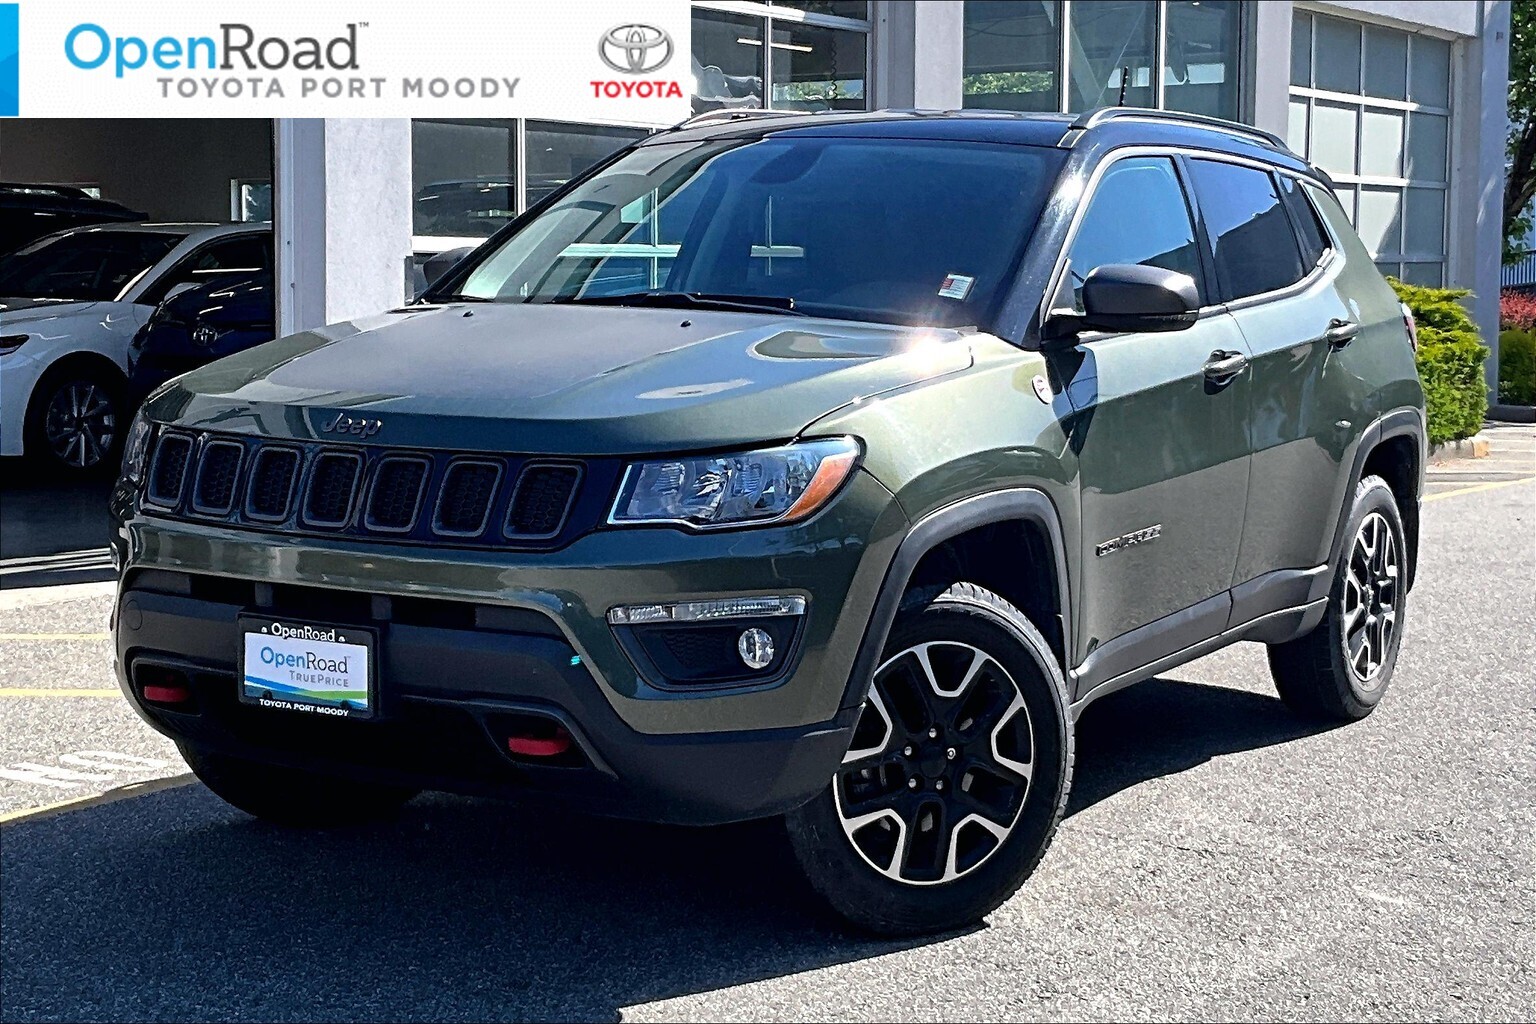 2020 Jeep Compass 4x4 Trailhawk |OpenRoad True Price |Local |One Own